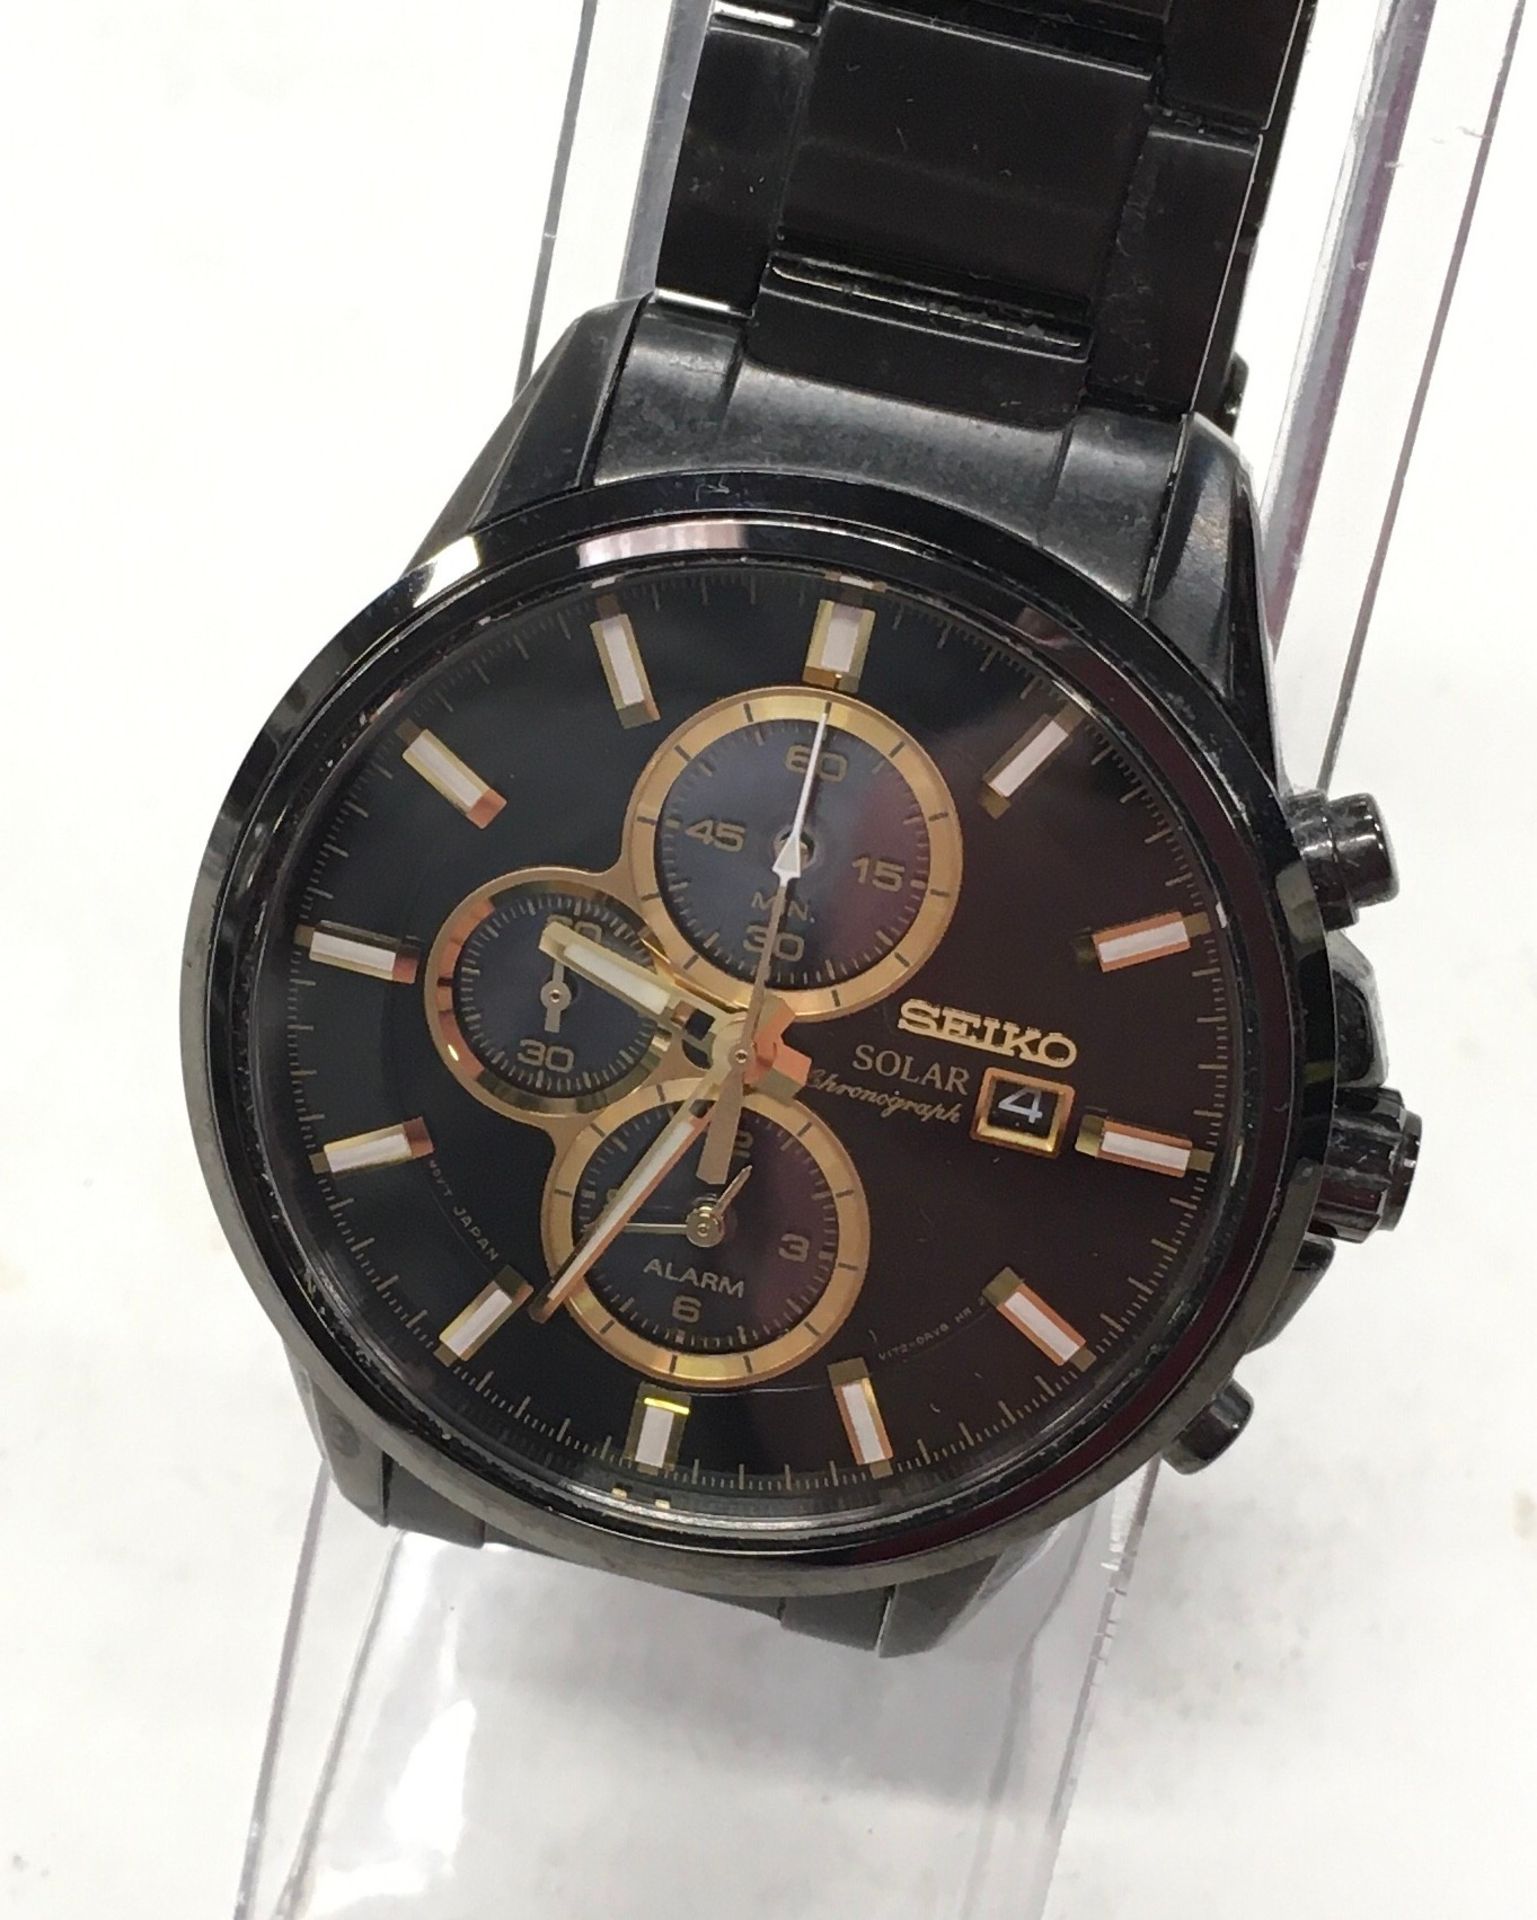 Seiko Solar Chronograph gents watch, model ref V172-0AR0. In very good condition. With box,